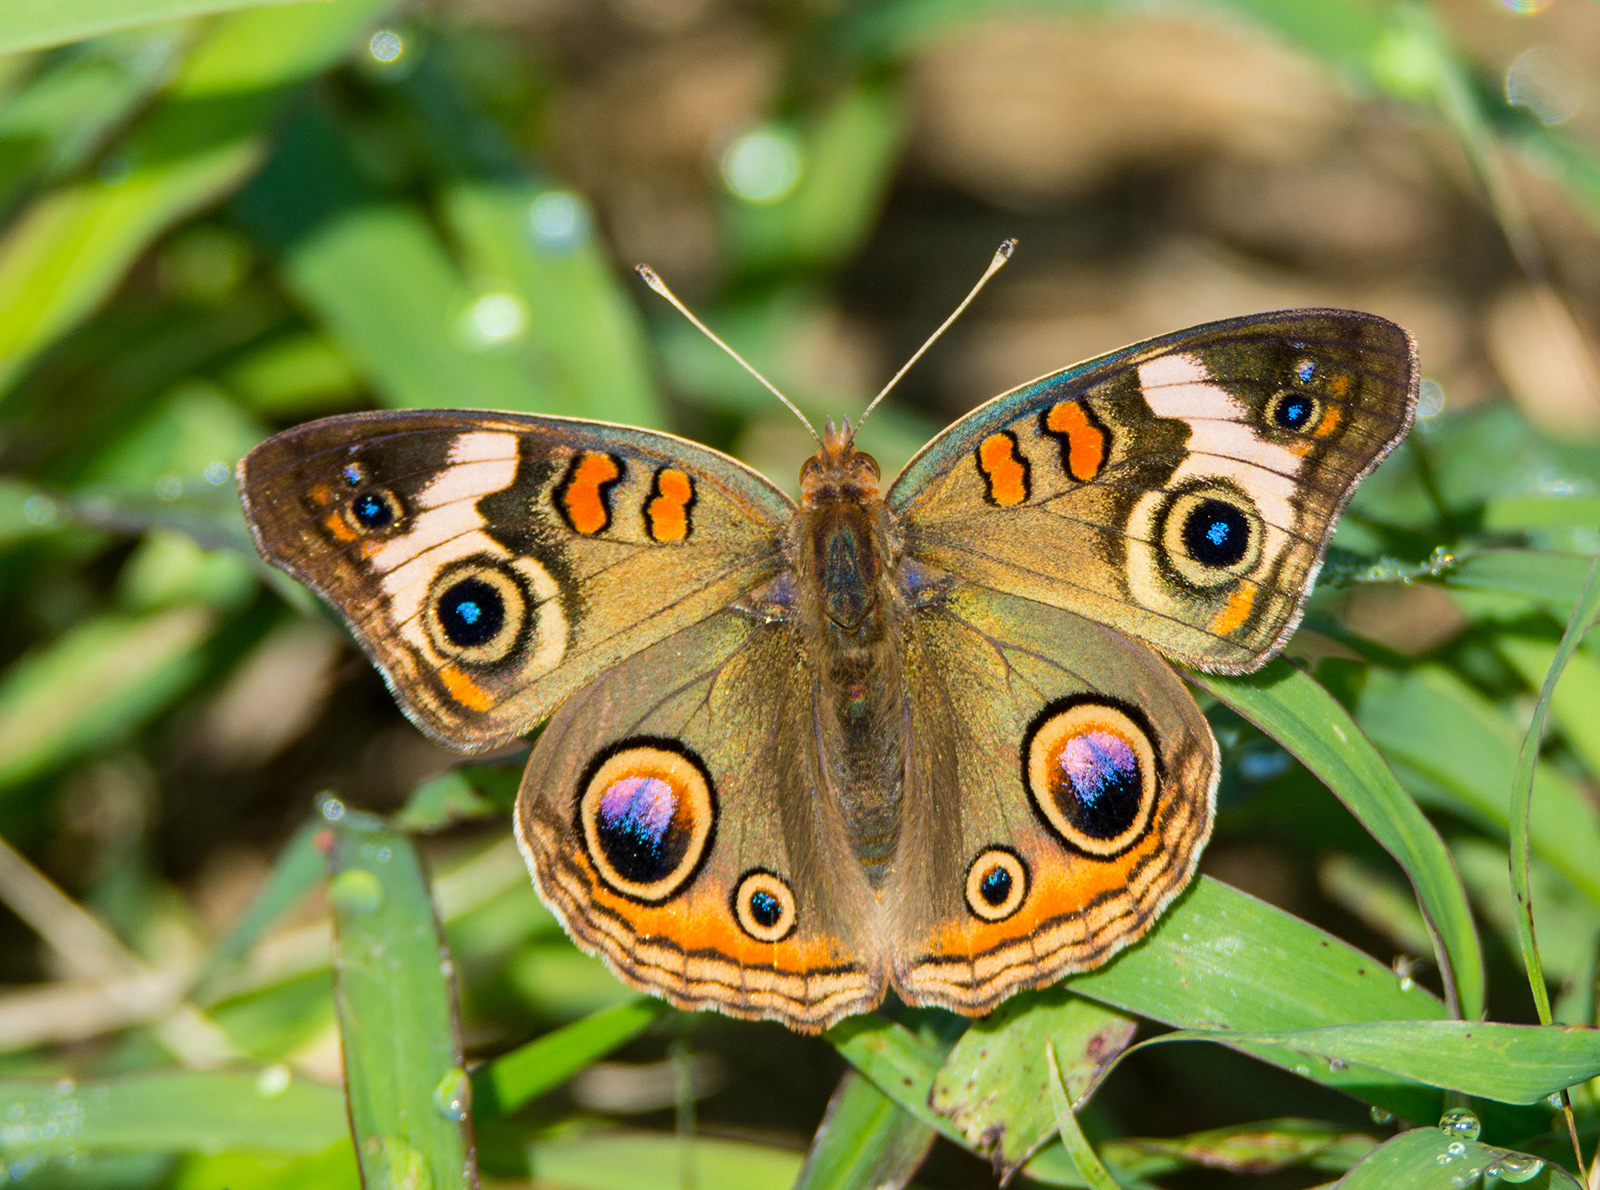 A close-up photo of a butterfly with orange, purple, and black spots on brown wings.